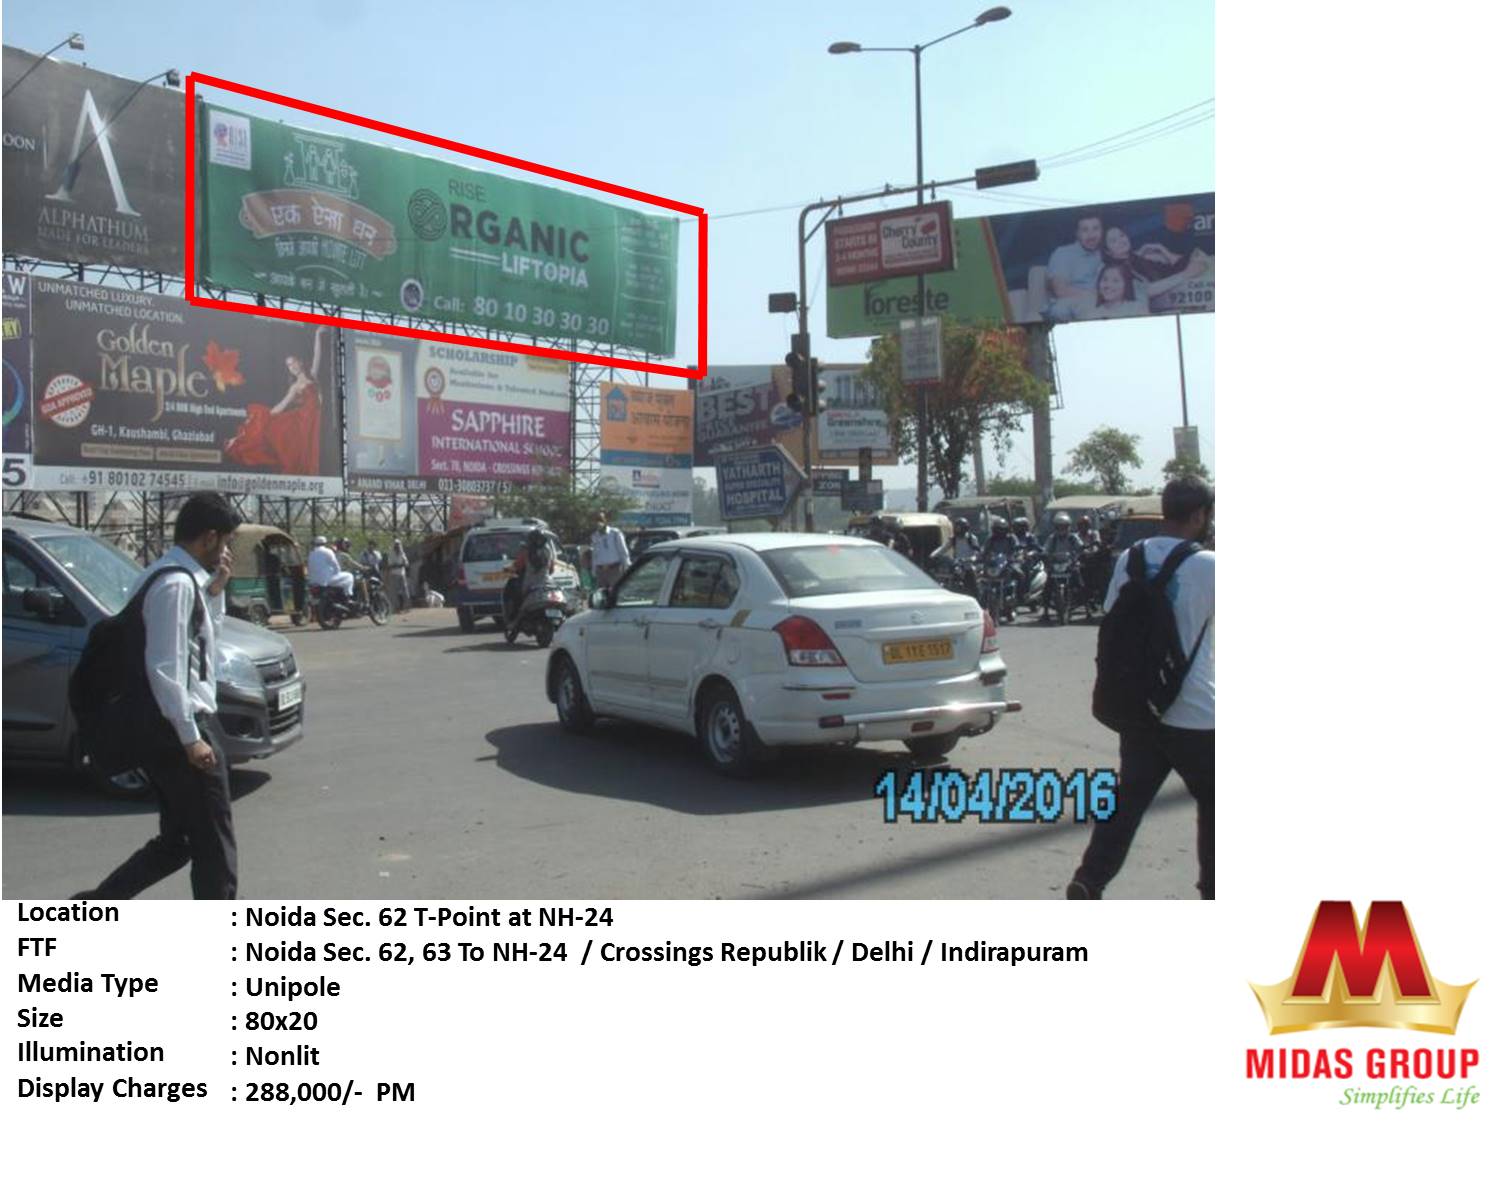 Noida Sec. 62 T-Point at NH-24, Ghaziabad